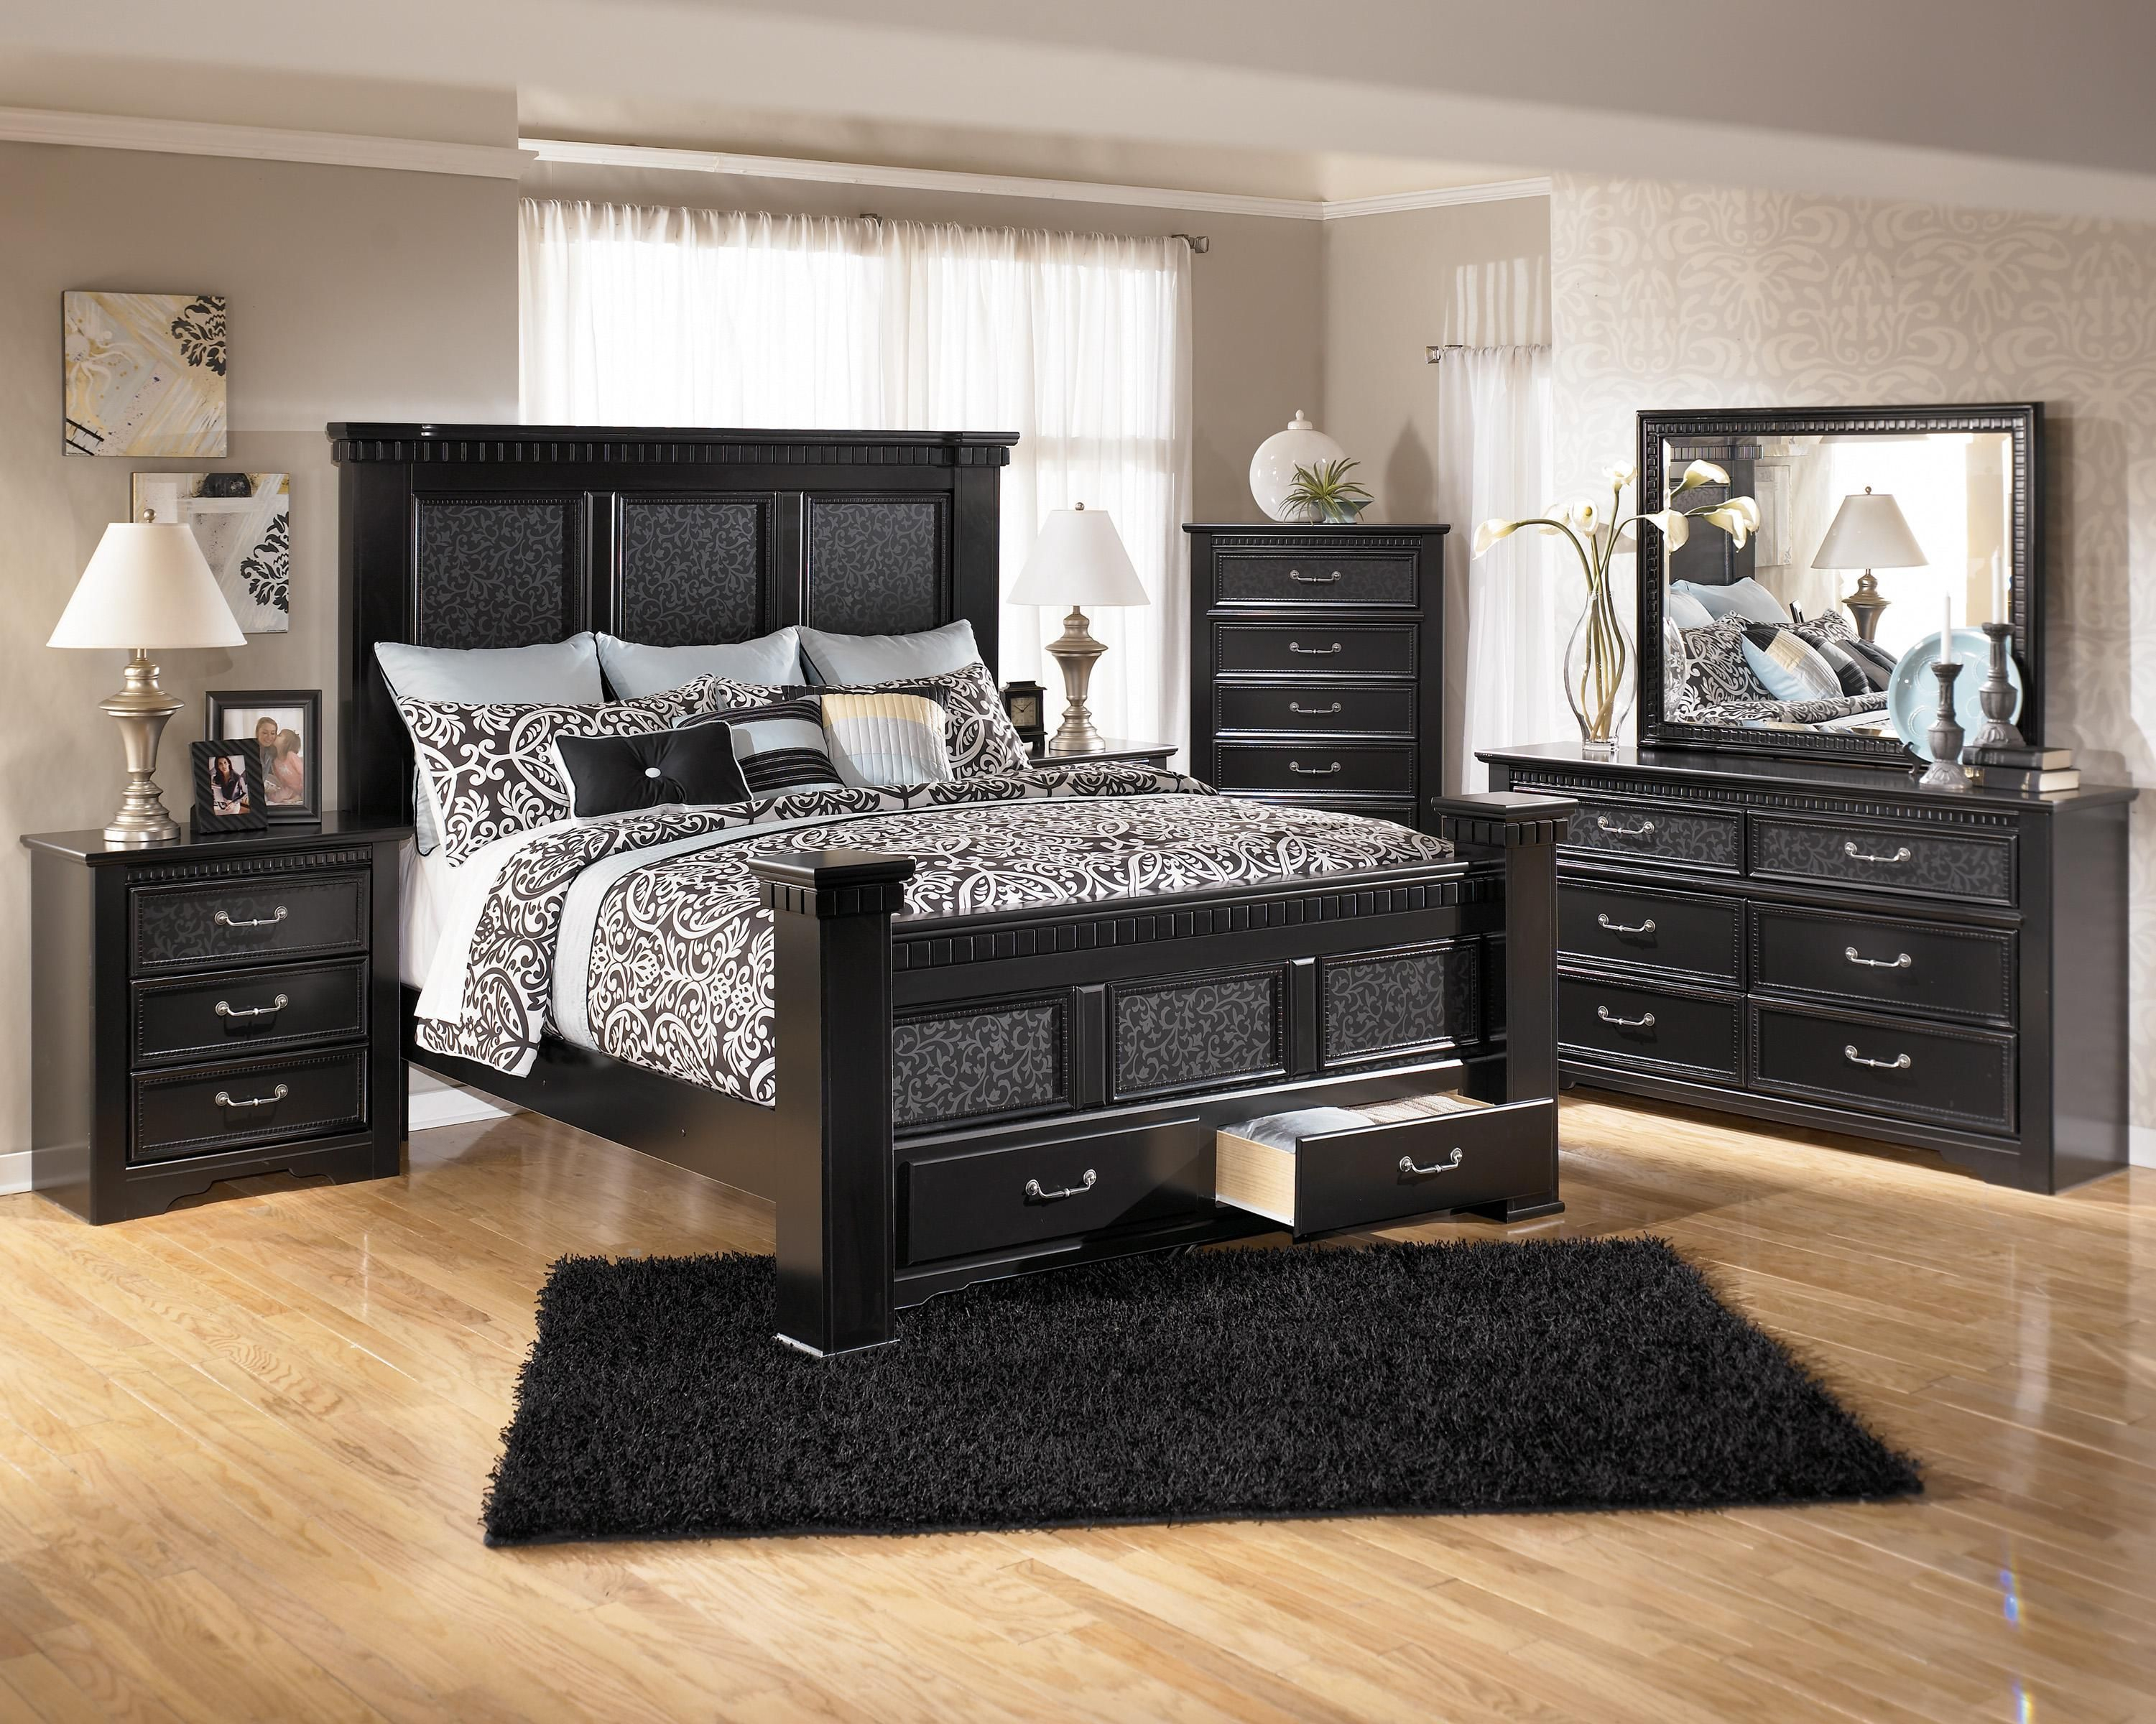 30 Inspiration Picture Of Black Bedroom Furniture Black Bedroom within size 3001 X 2400